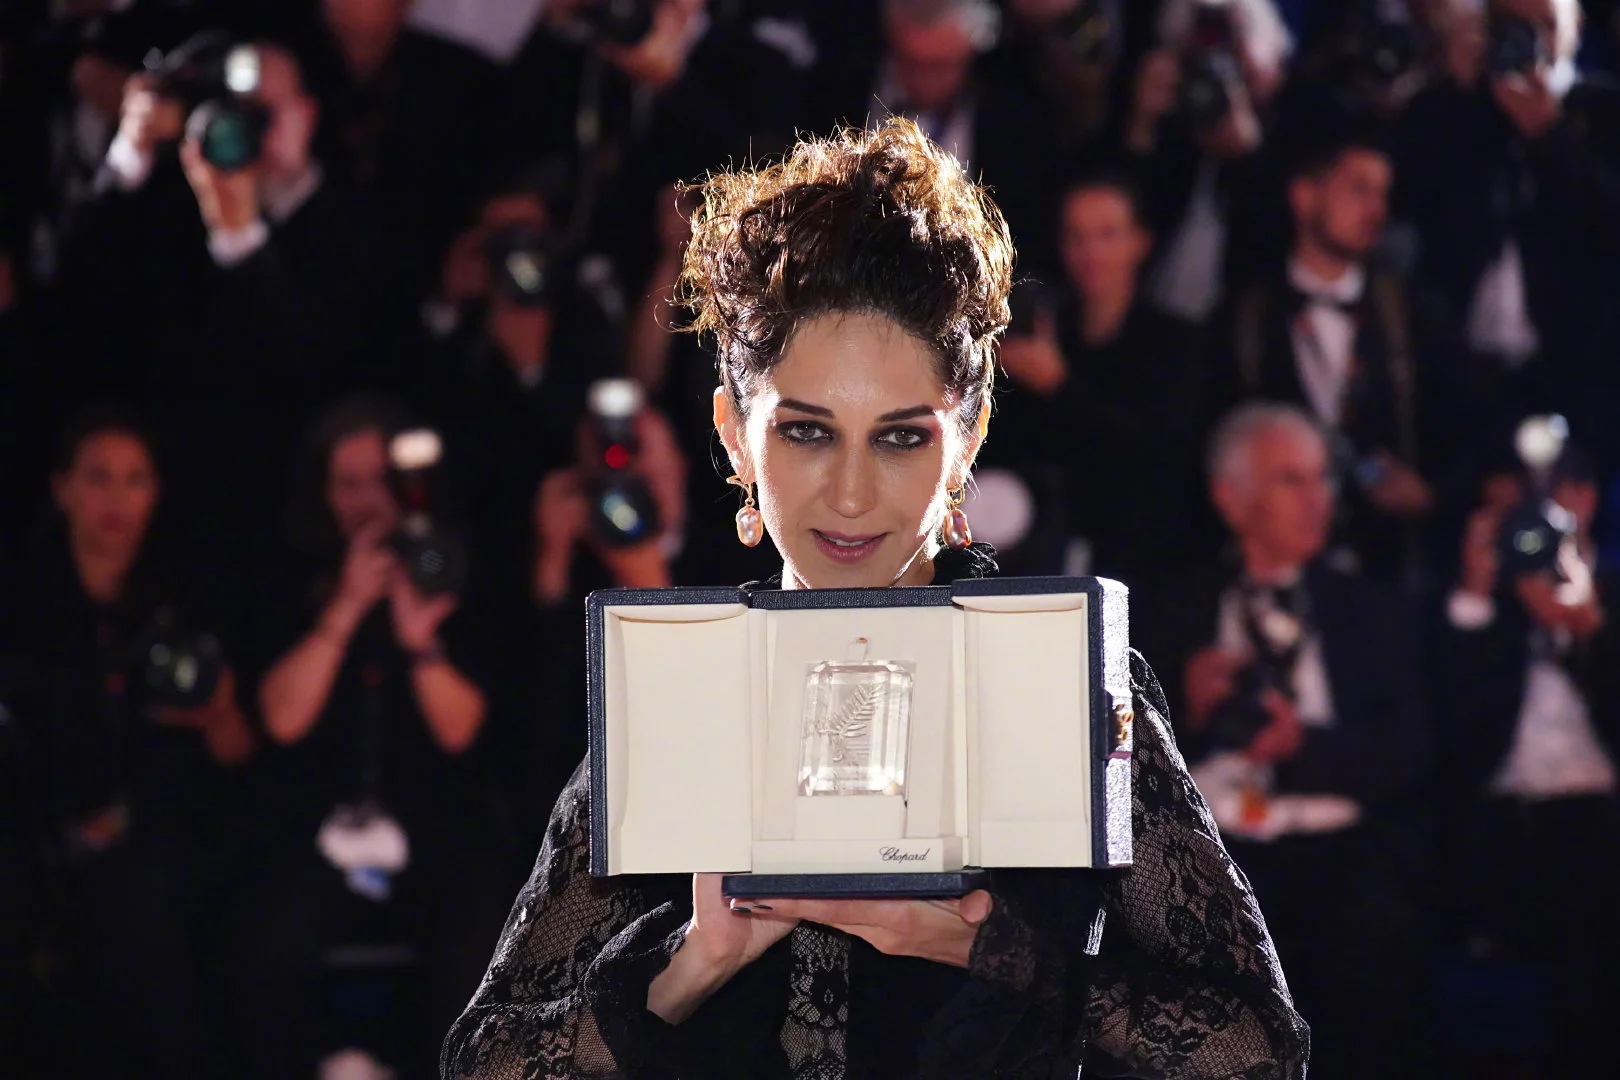 Zahra Amir Ebrahimi wins Best Actress at the 75th Cannes Film Festival for "Holy Spider"